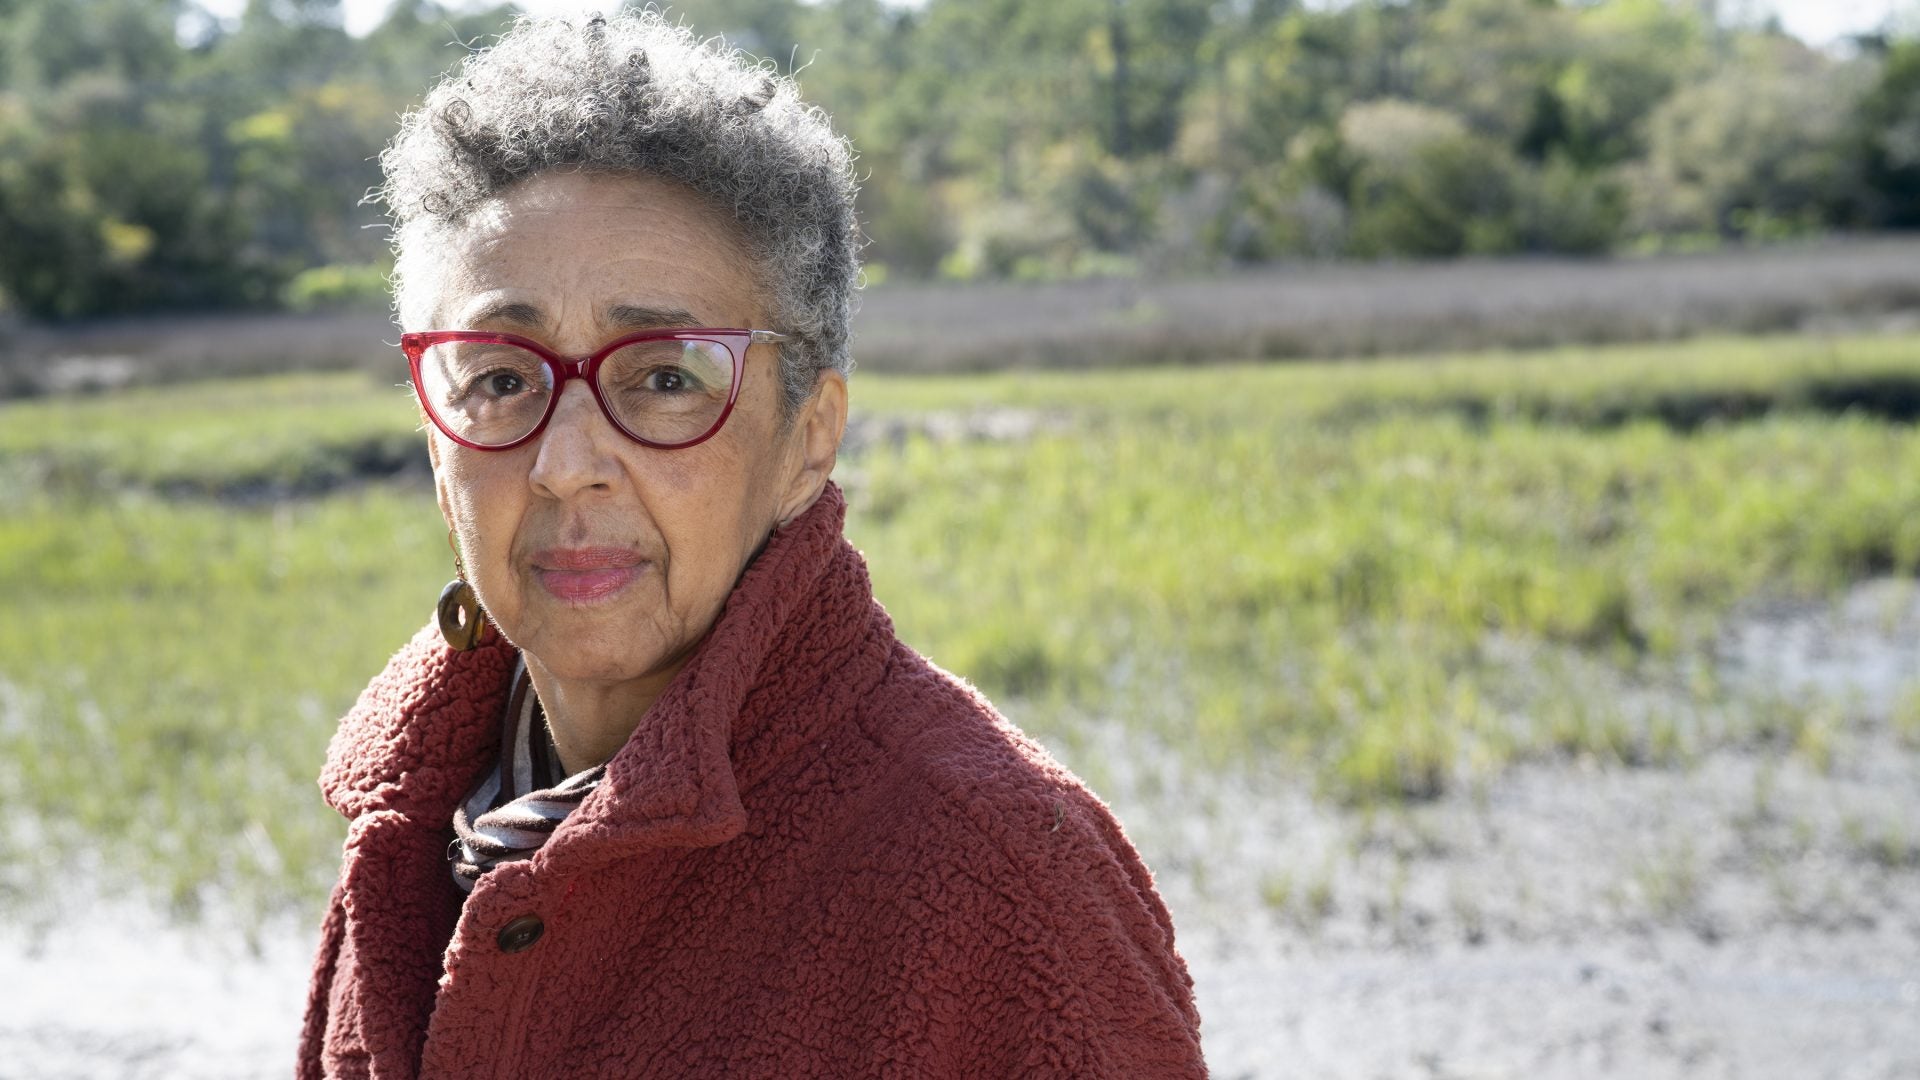 Millicent Brown Helped Desegregate Public Schools In South Carolina. Now She's Sharing Her Civil Rights Journey In A New Book